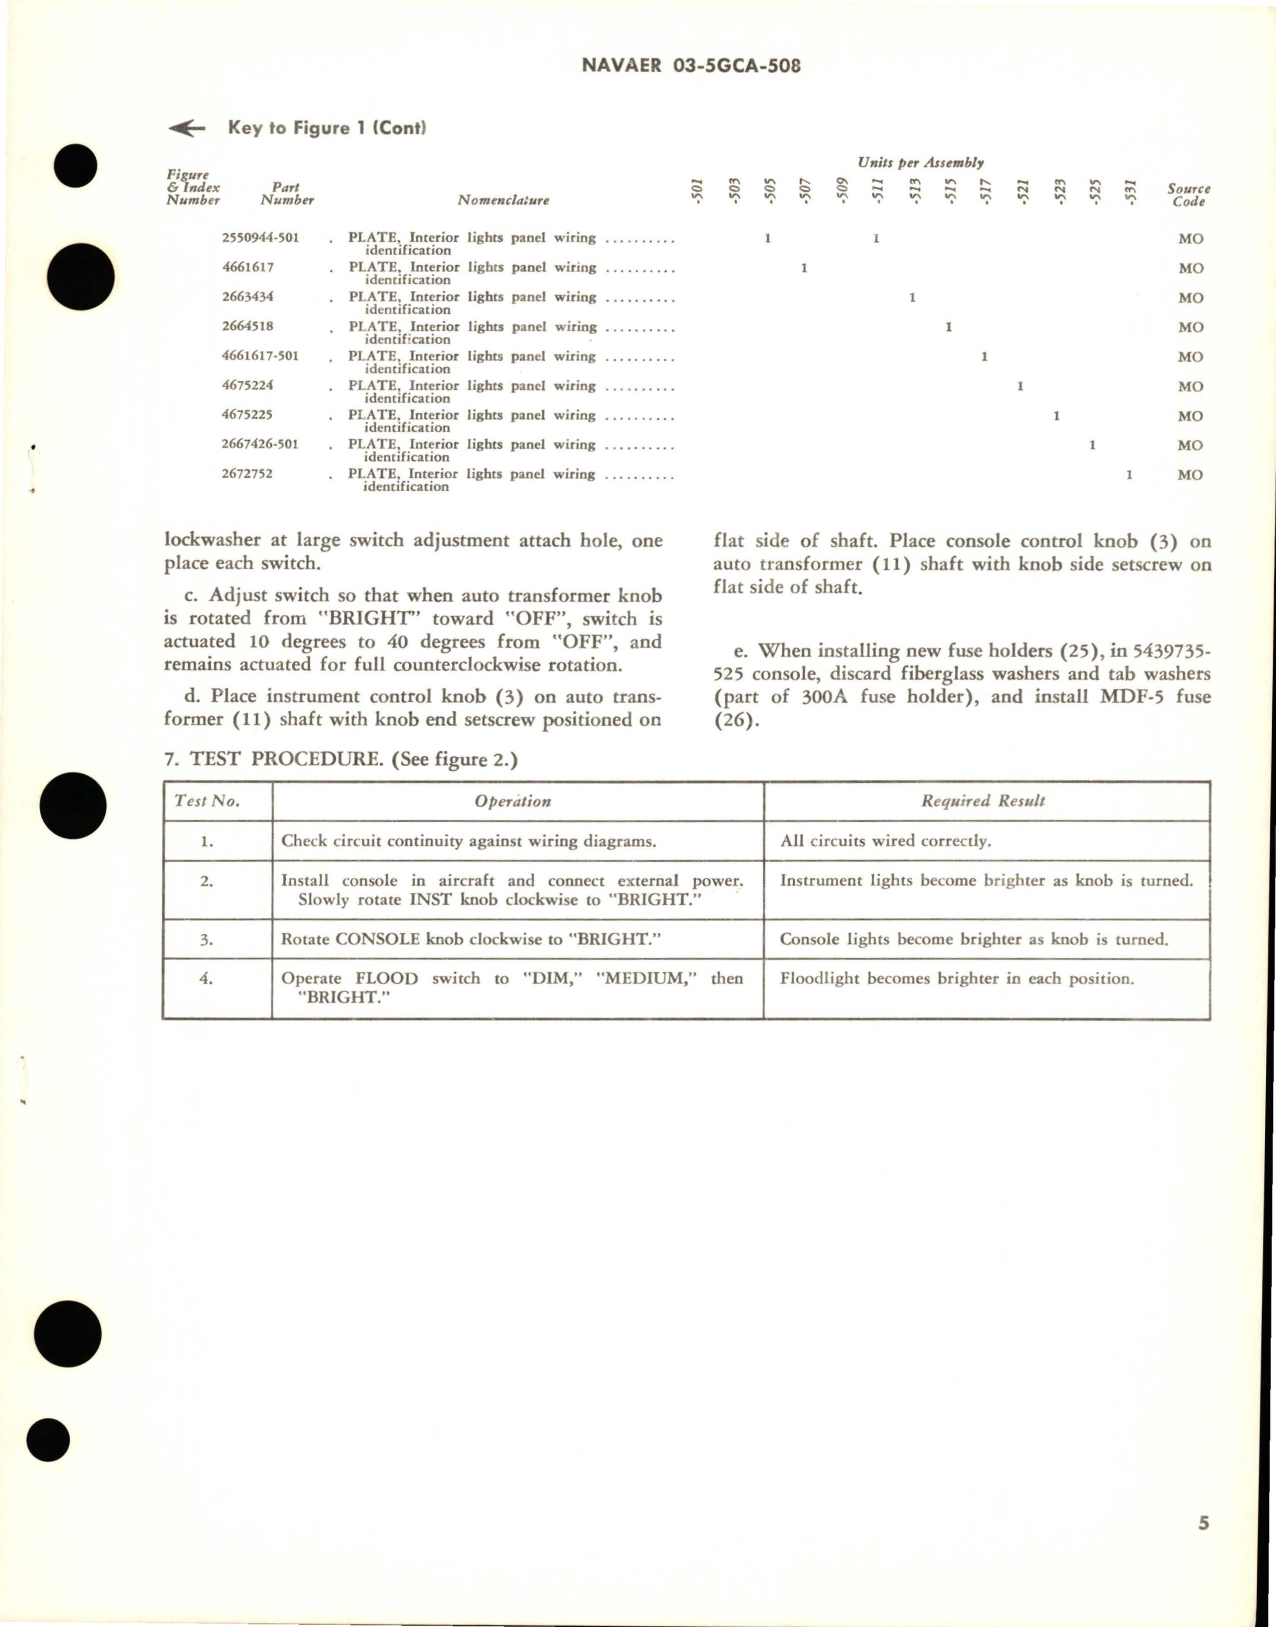 Sample page 5 from AirCorps Library document: Overhaul Instructions with Parts Breakdown for Interior Lights Control Console Assembly 